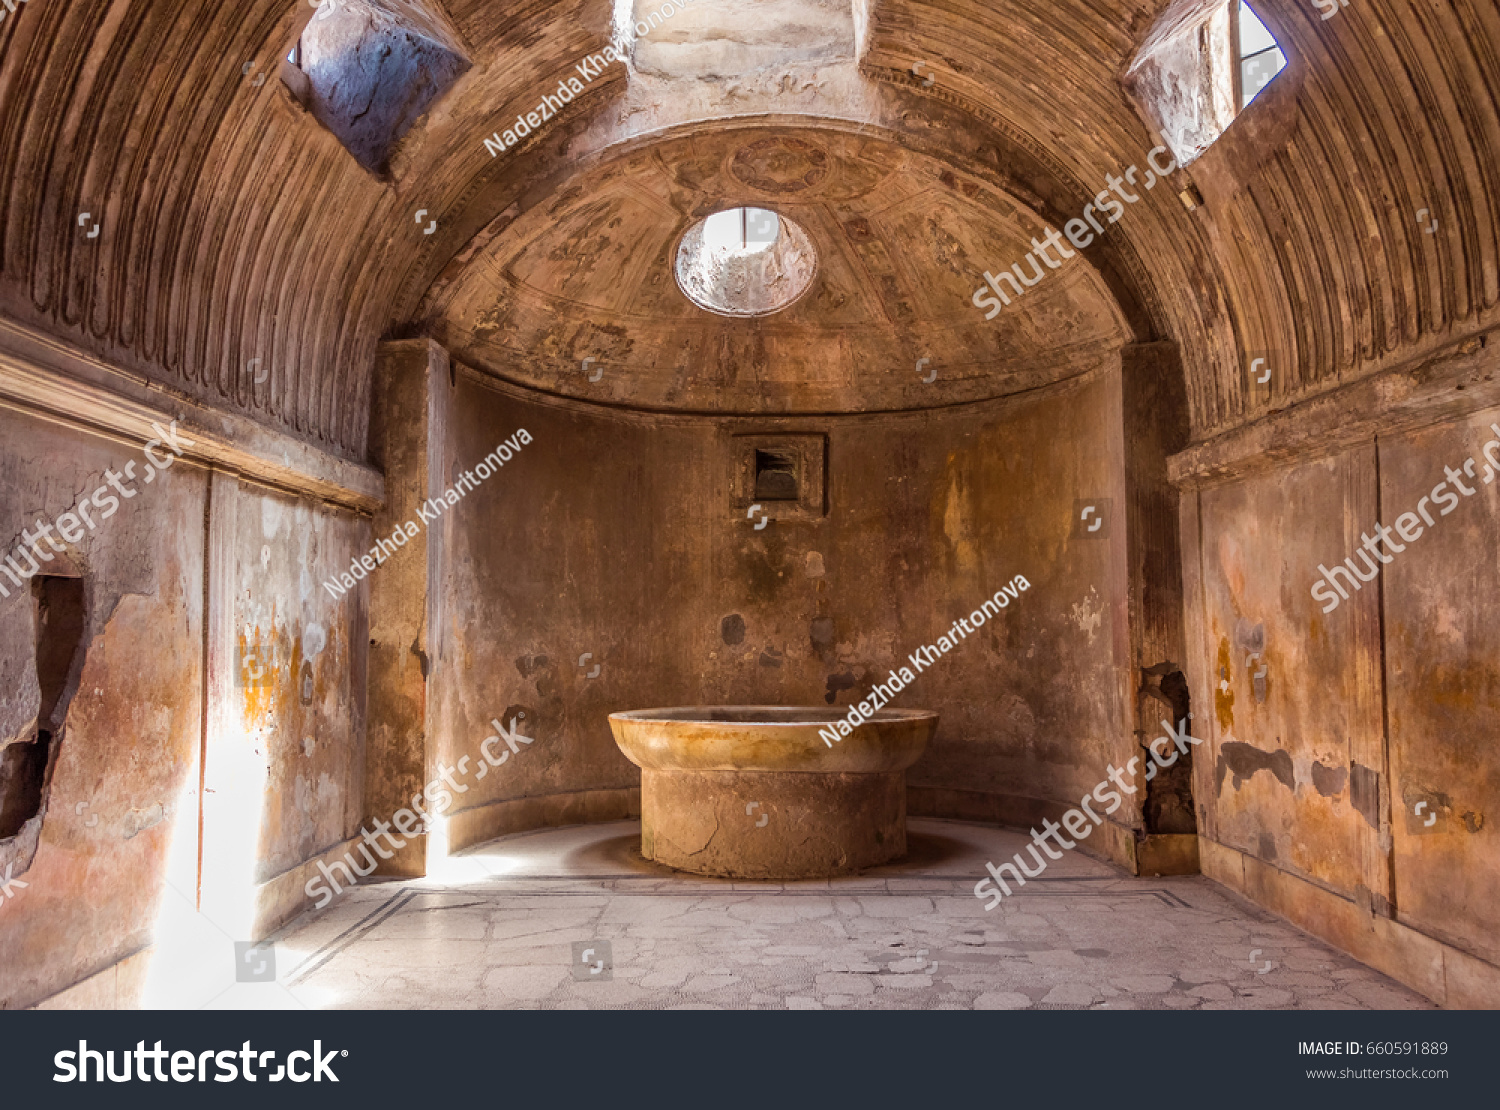 The interior of main public baths in ruins of Ancient Roman city Pompeii, Campania region, Italy. Sunny day. City destroyed by the eruption of Mount Vesuvius. Inside of Forum Baths. Big bowl for water #660591889